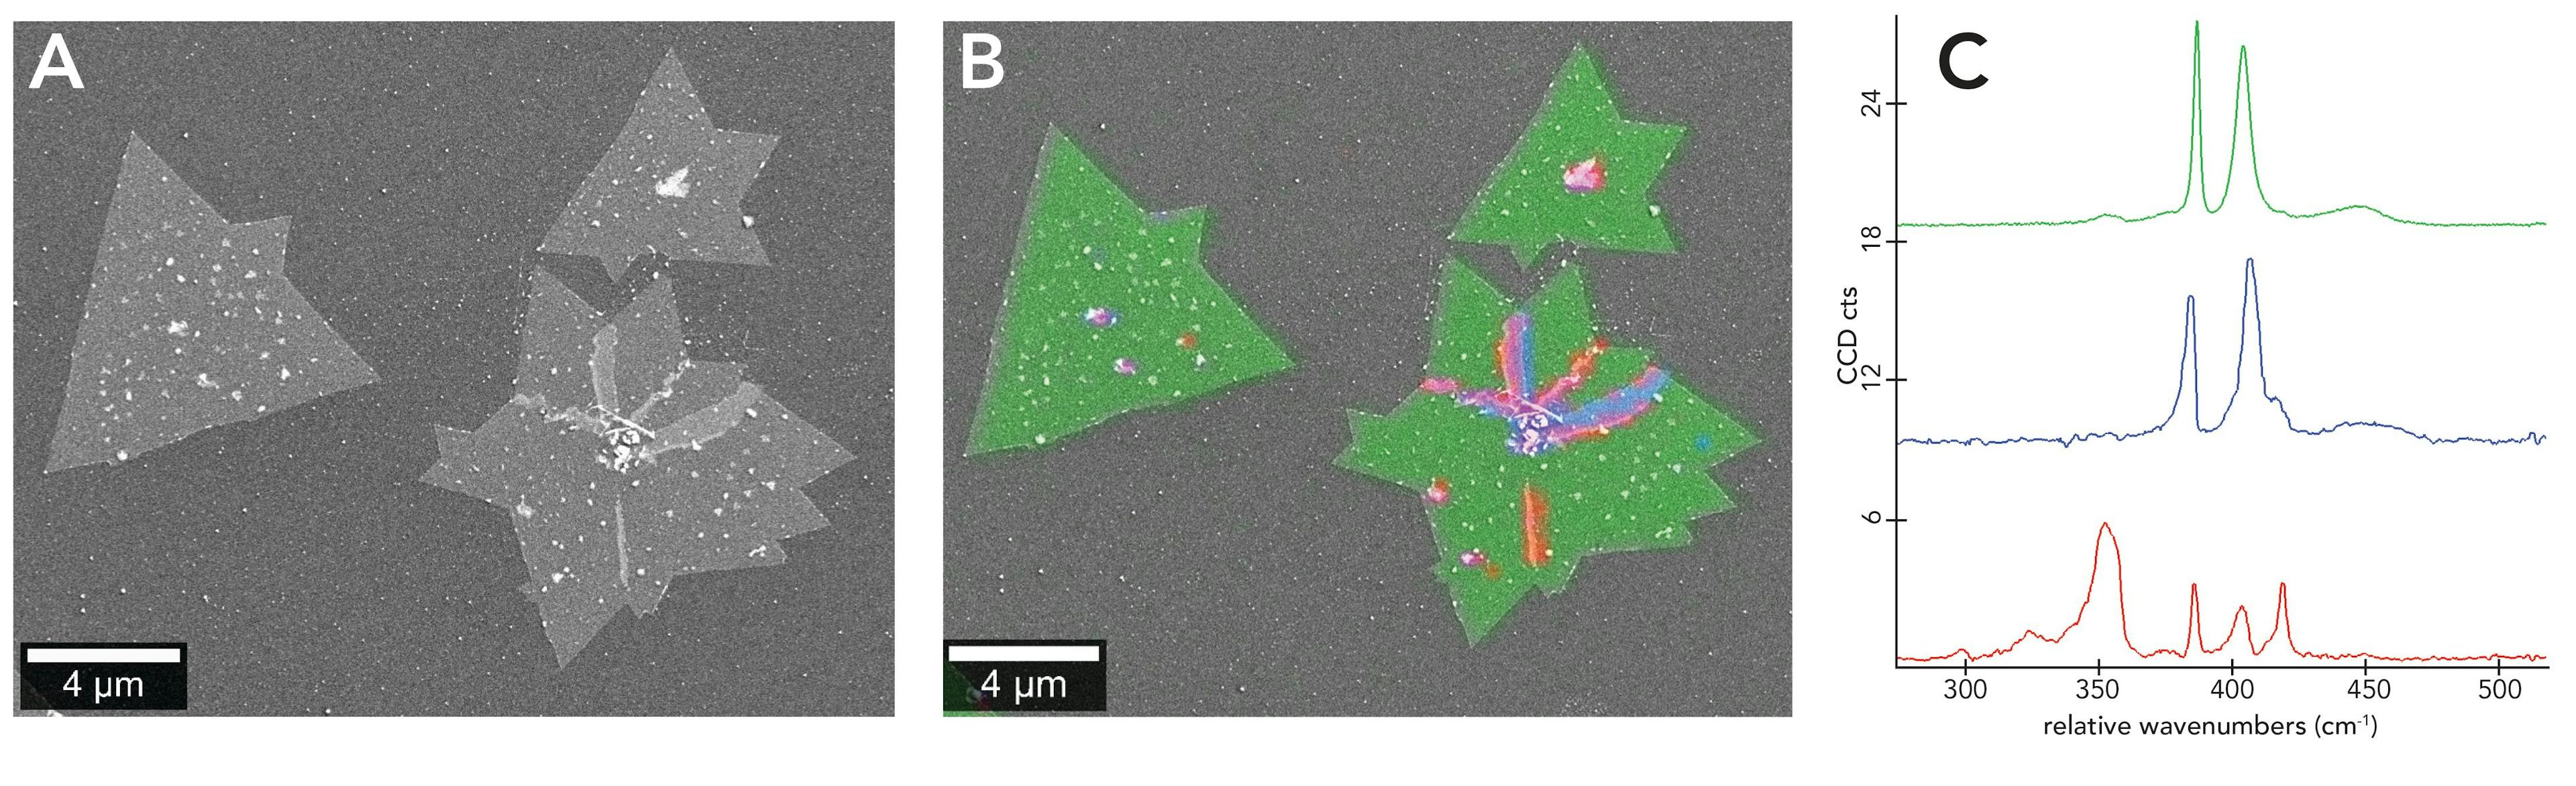 Figure 2: MoS2 crystals A: SEM image of MoS2 crystals. B: Color-coded Raman image derived from the spectral information overlaid on the SEM image to produce the RISE image. C: Raman spectra of MoS2: green = 1L MoS2, blue and red = edges and defects.

(Sample courtesy of Ting Yu, Nanyang Technological University, Singapore.)